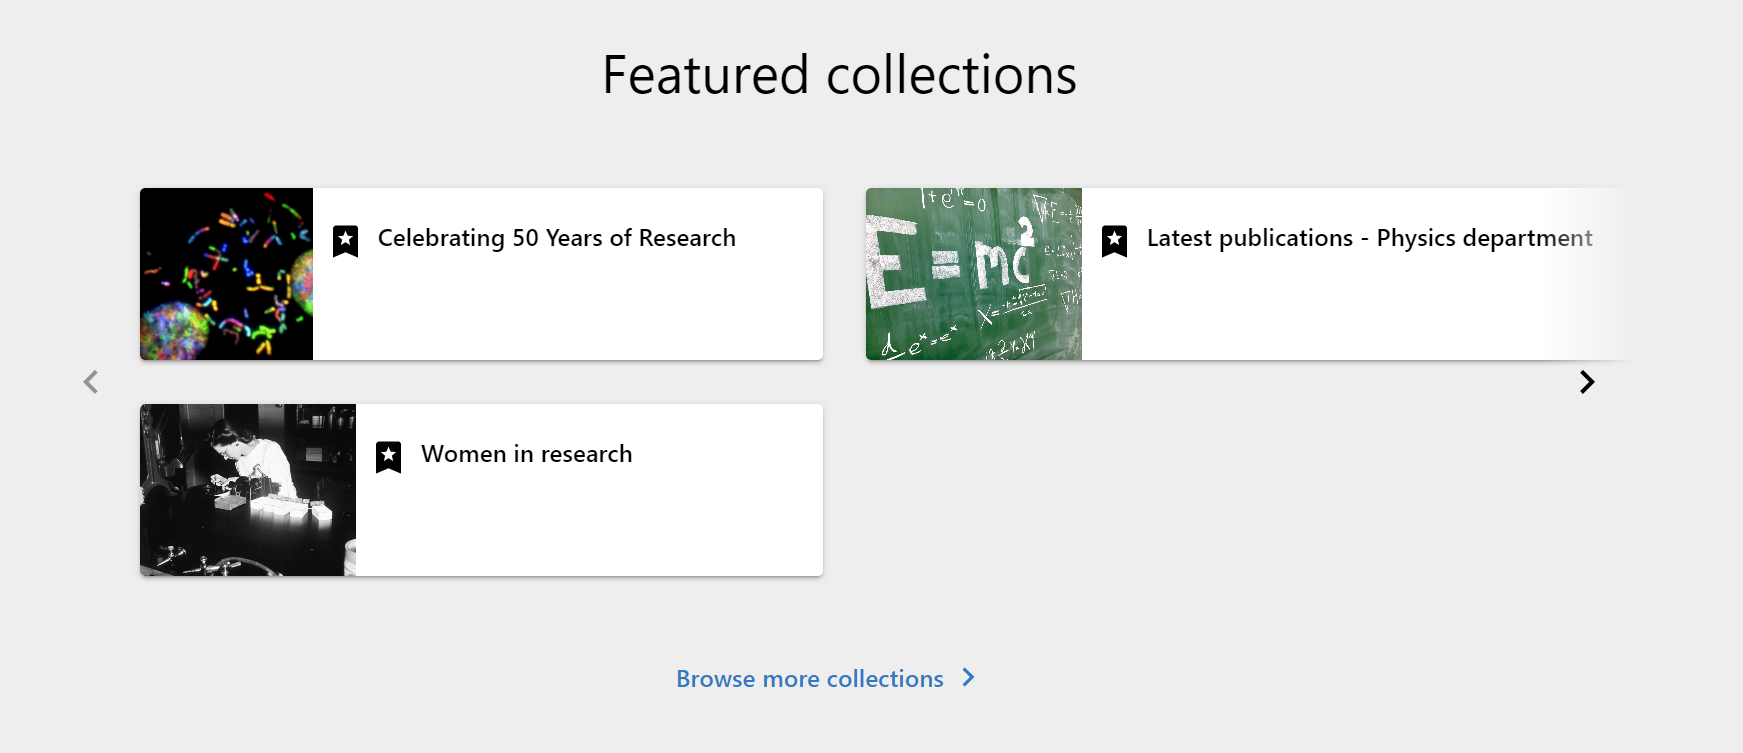 Featured collections on homepage of portal.